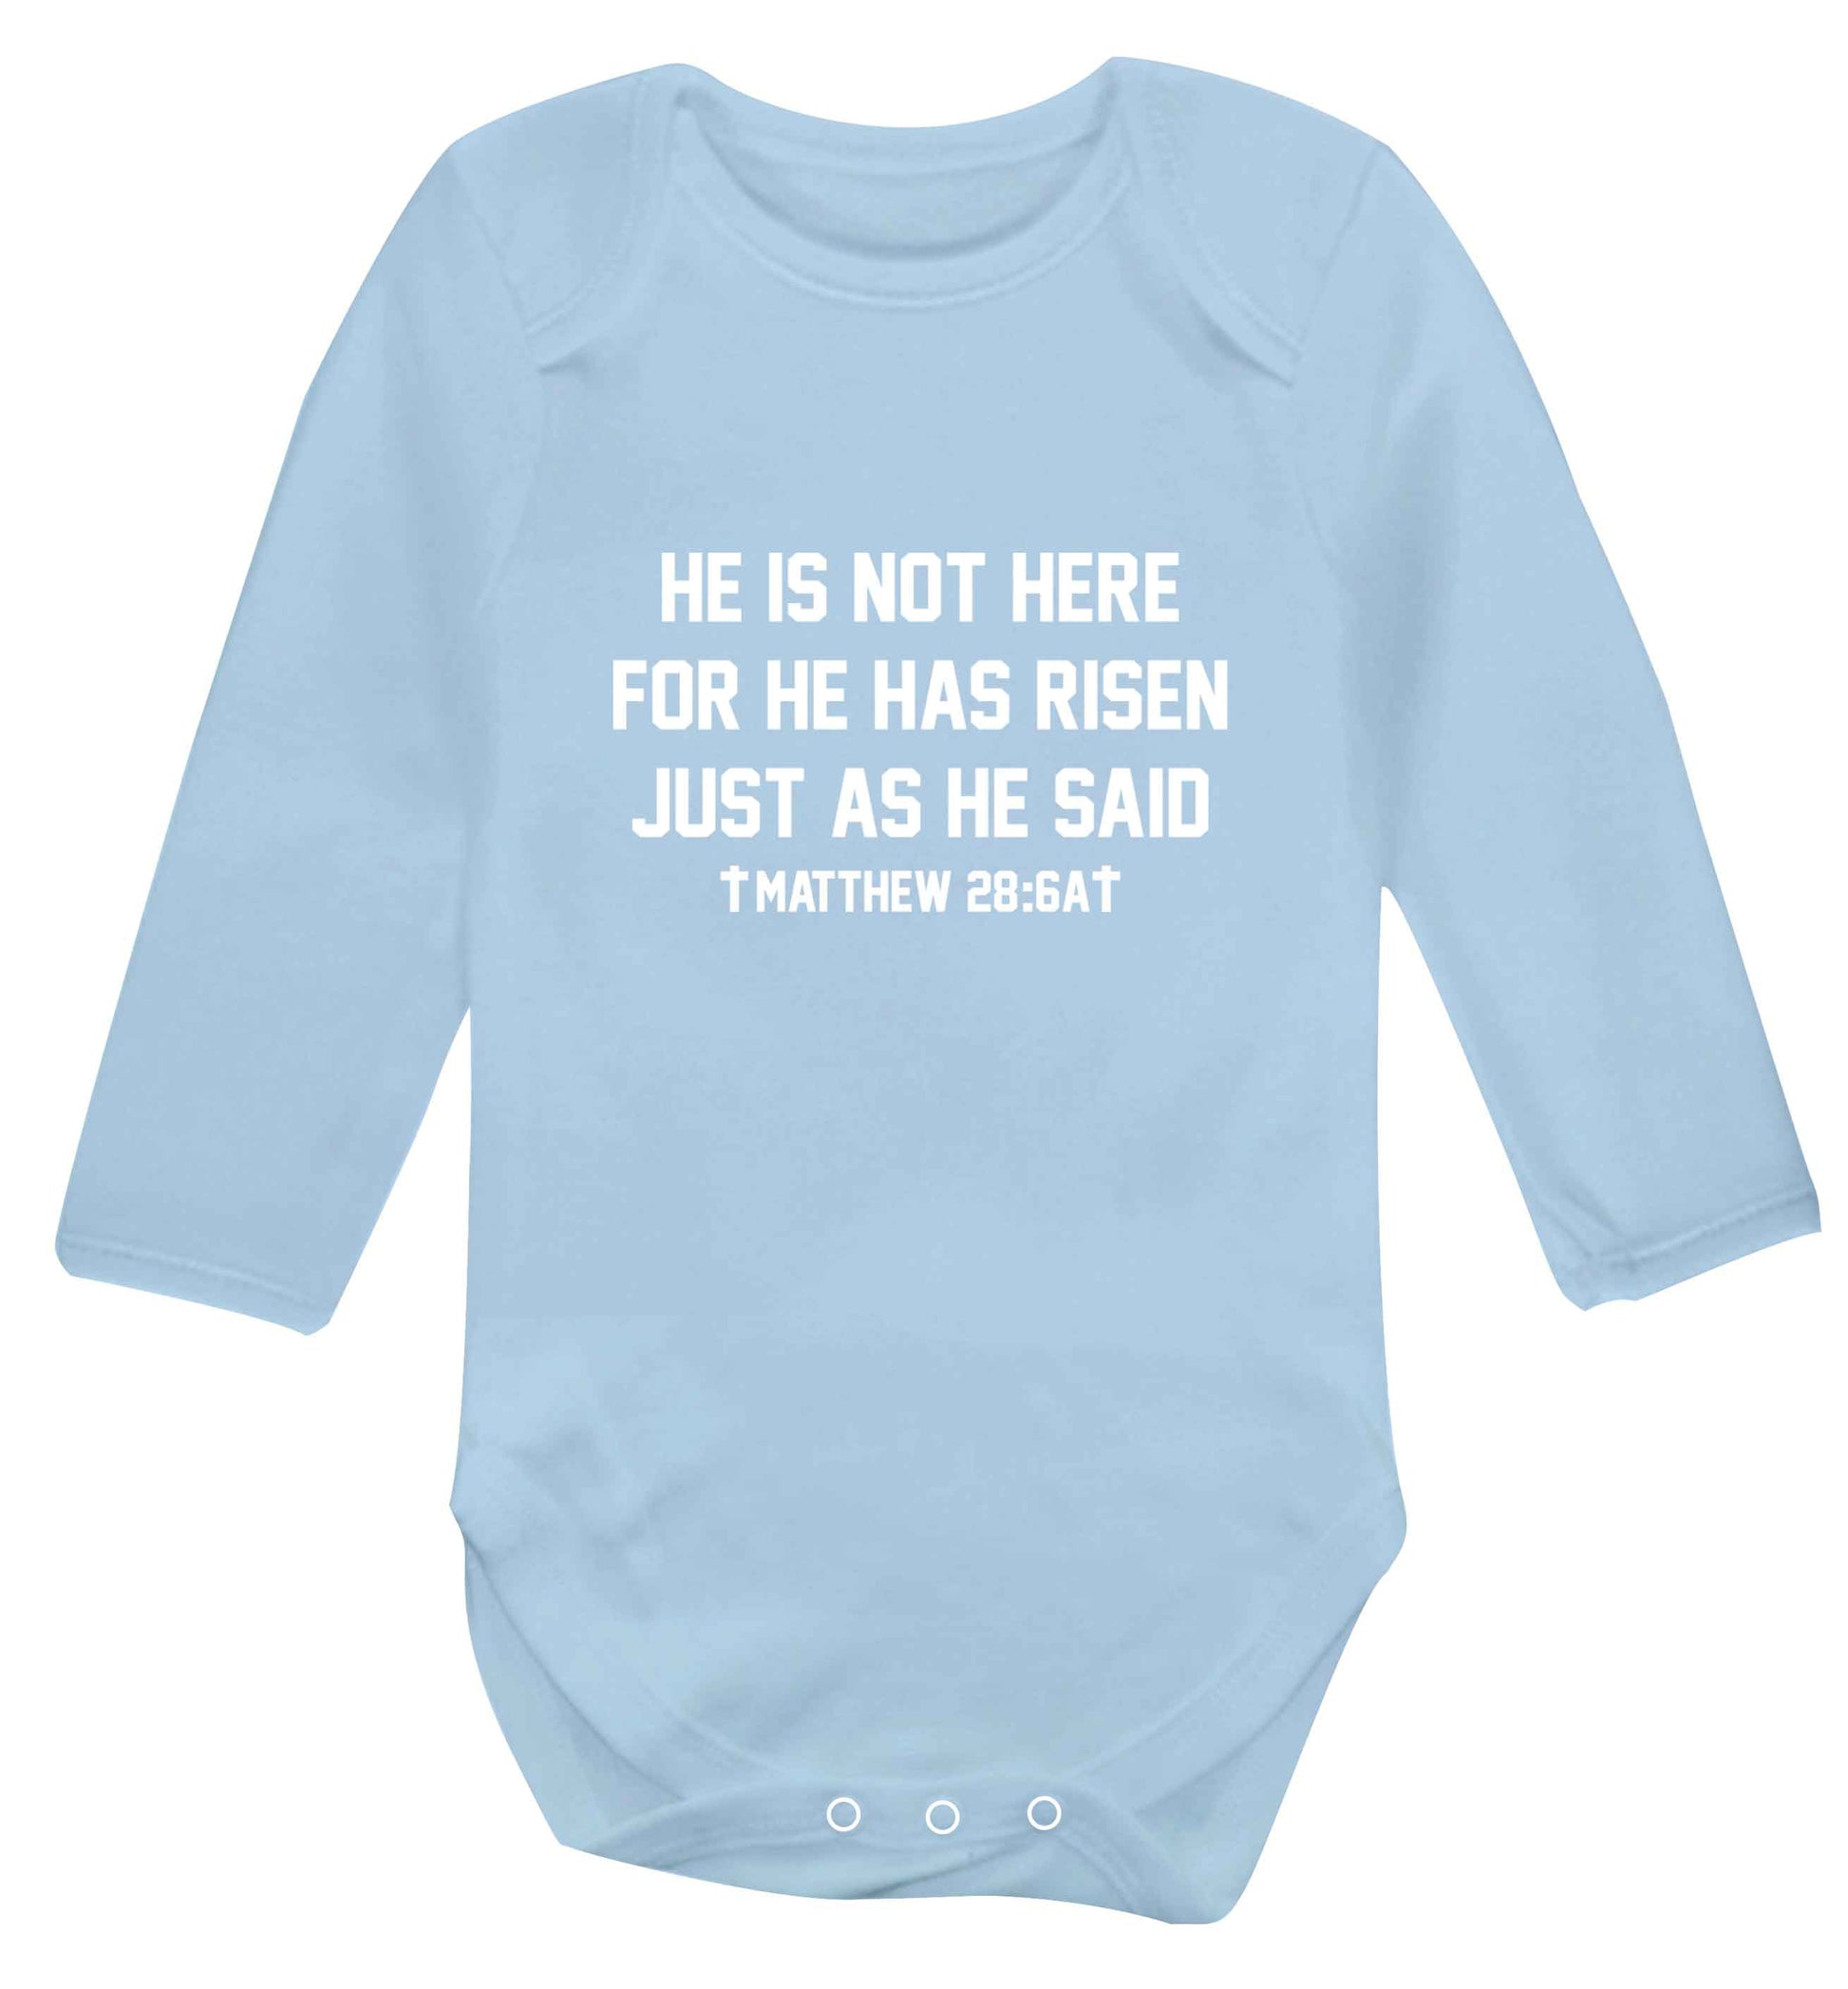 He is not here for he has risen just as he said matthew 28:6A baby vest long sleeved pale blue 6-12 months